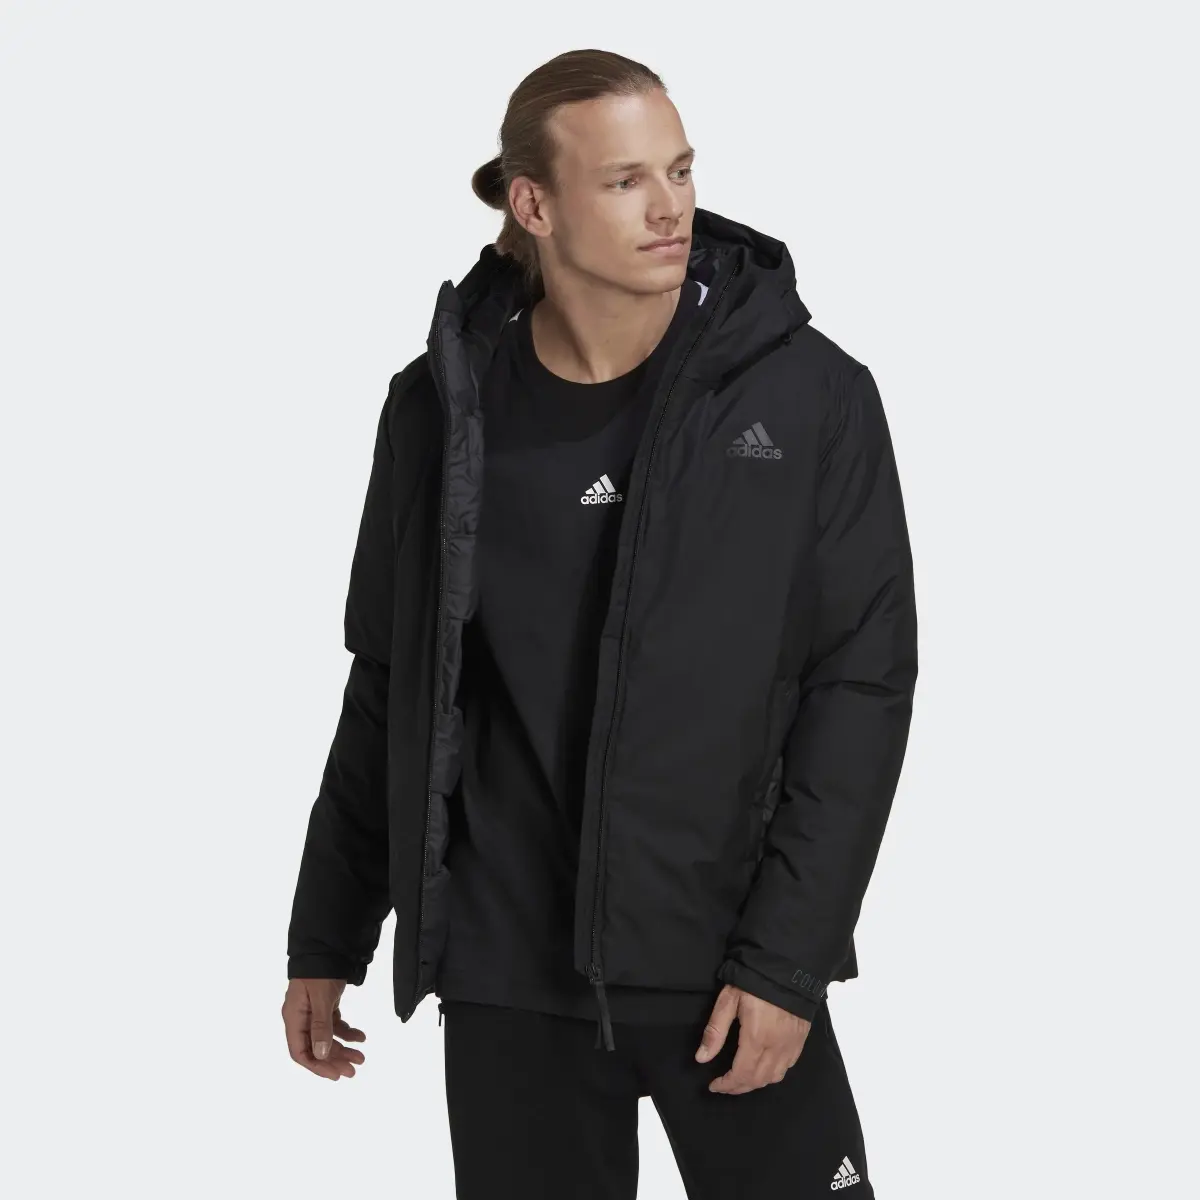 Adidas Traveer COLD.RDY Jacket. 2